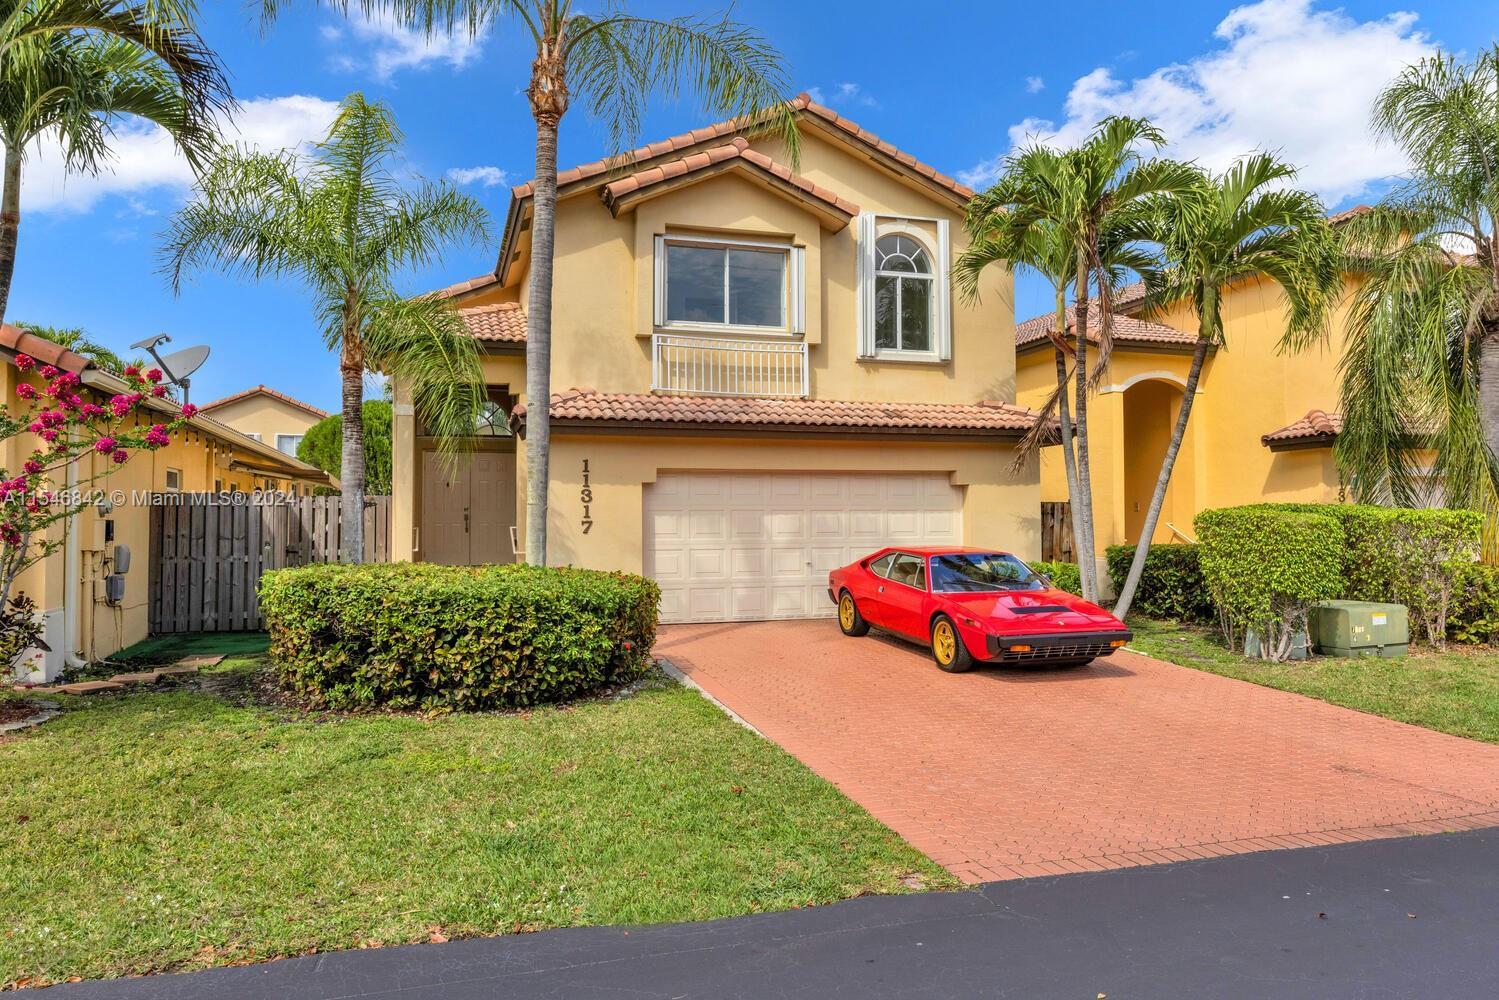 Photo of 11317 NW 52nd Ln in Doral, FL